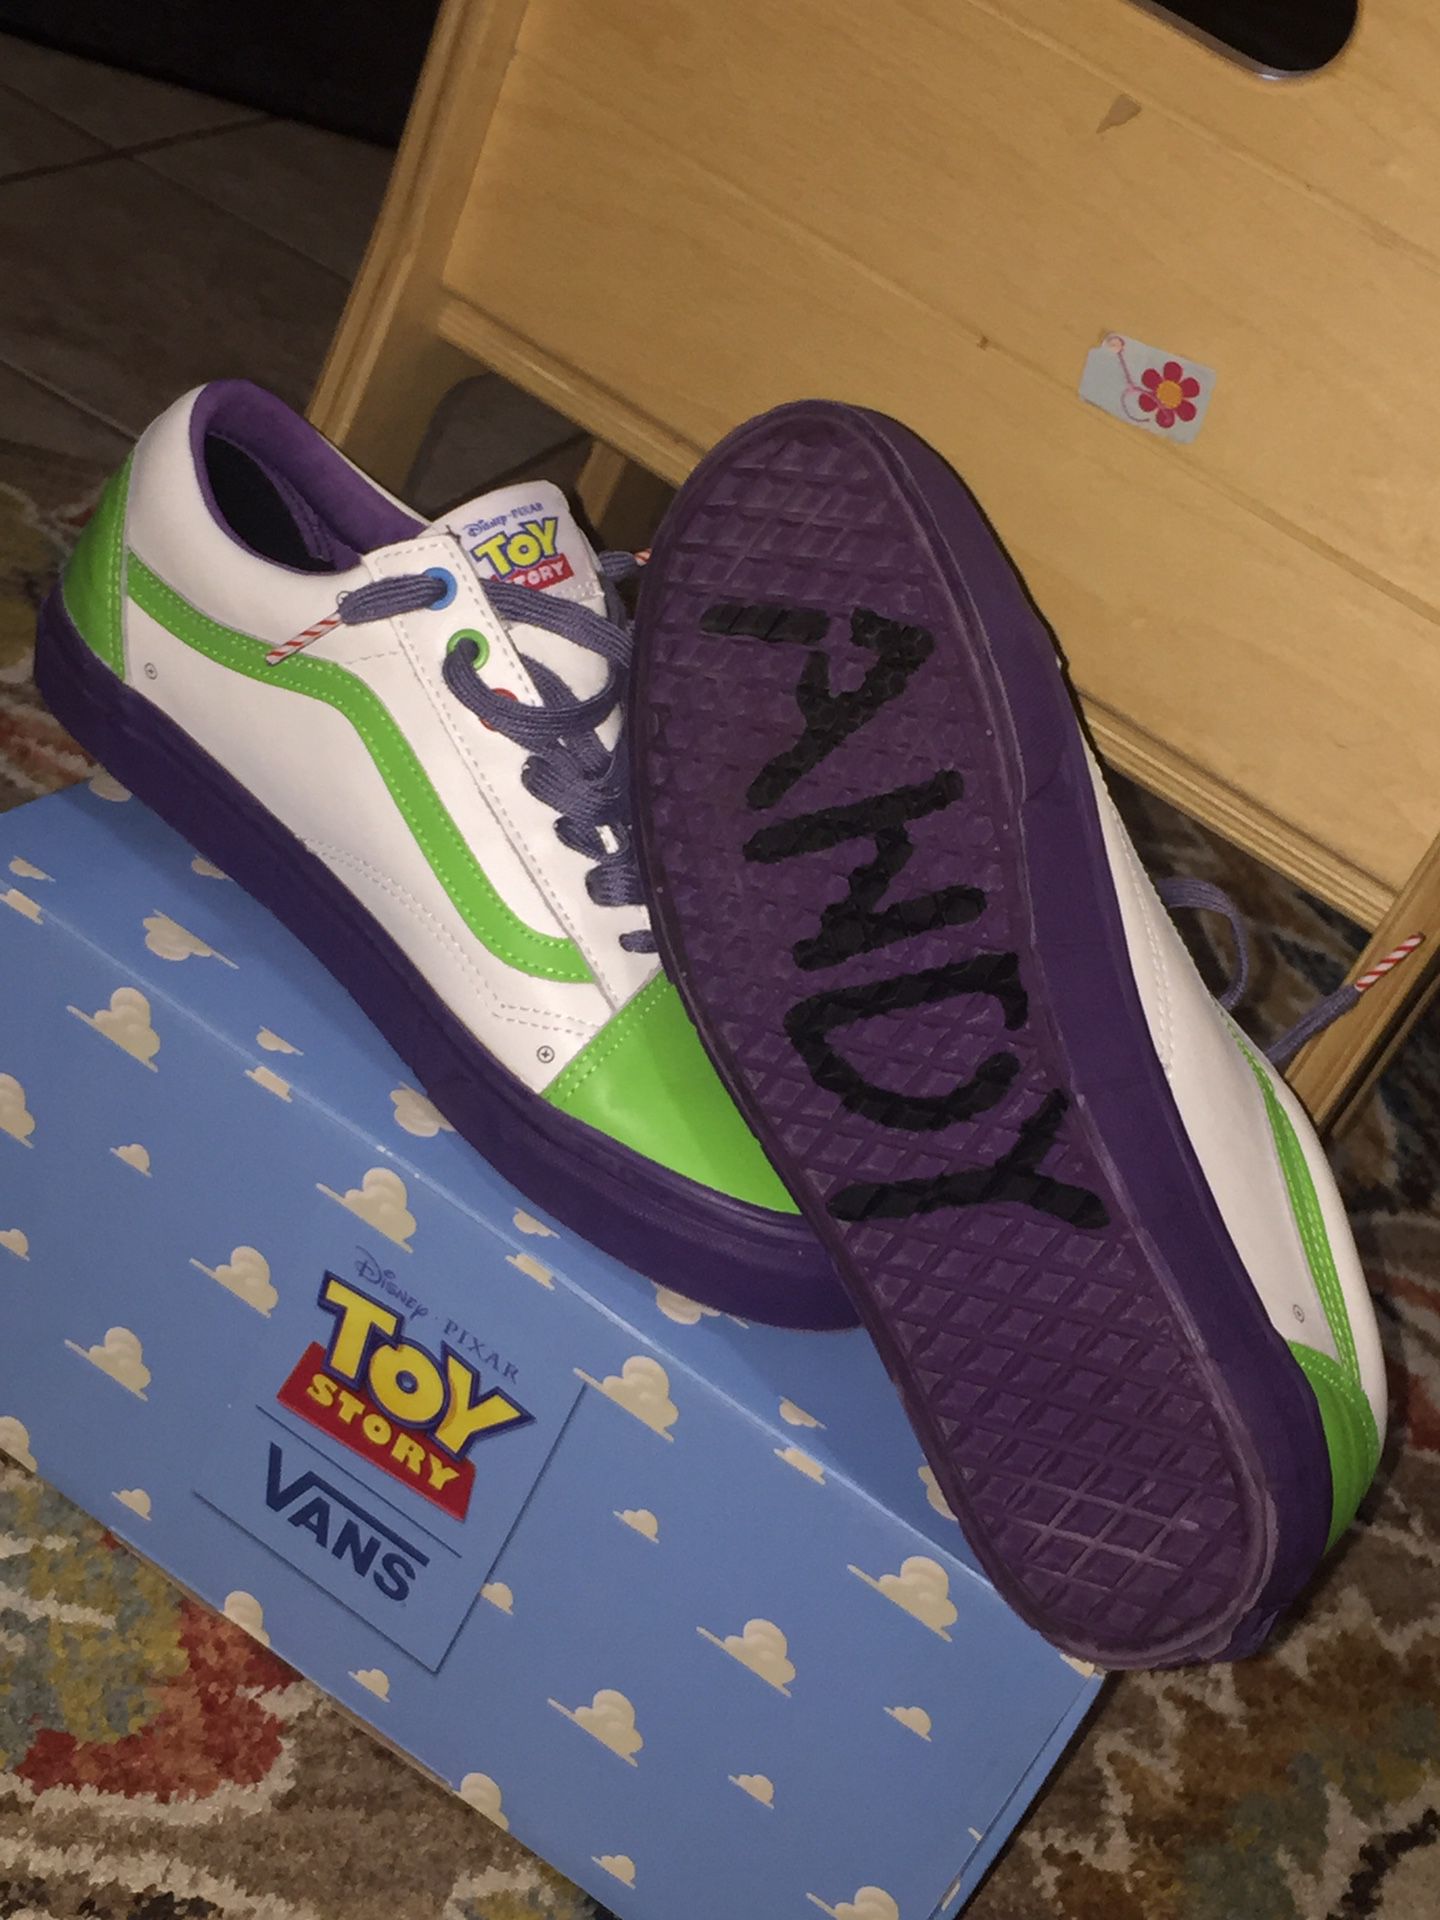 Old school toy story vans size 9.5